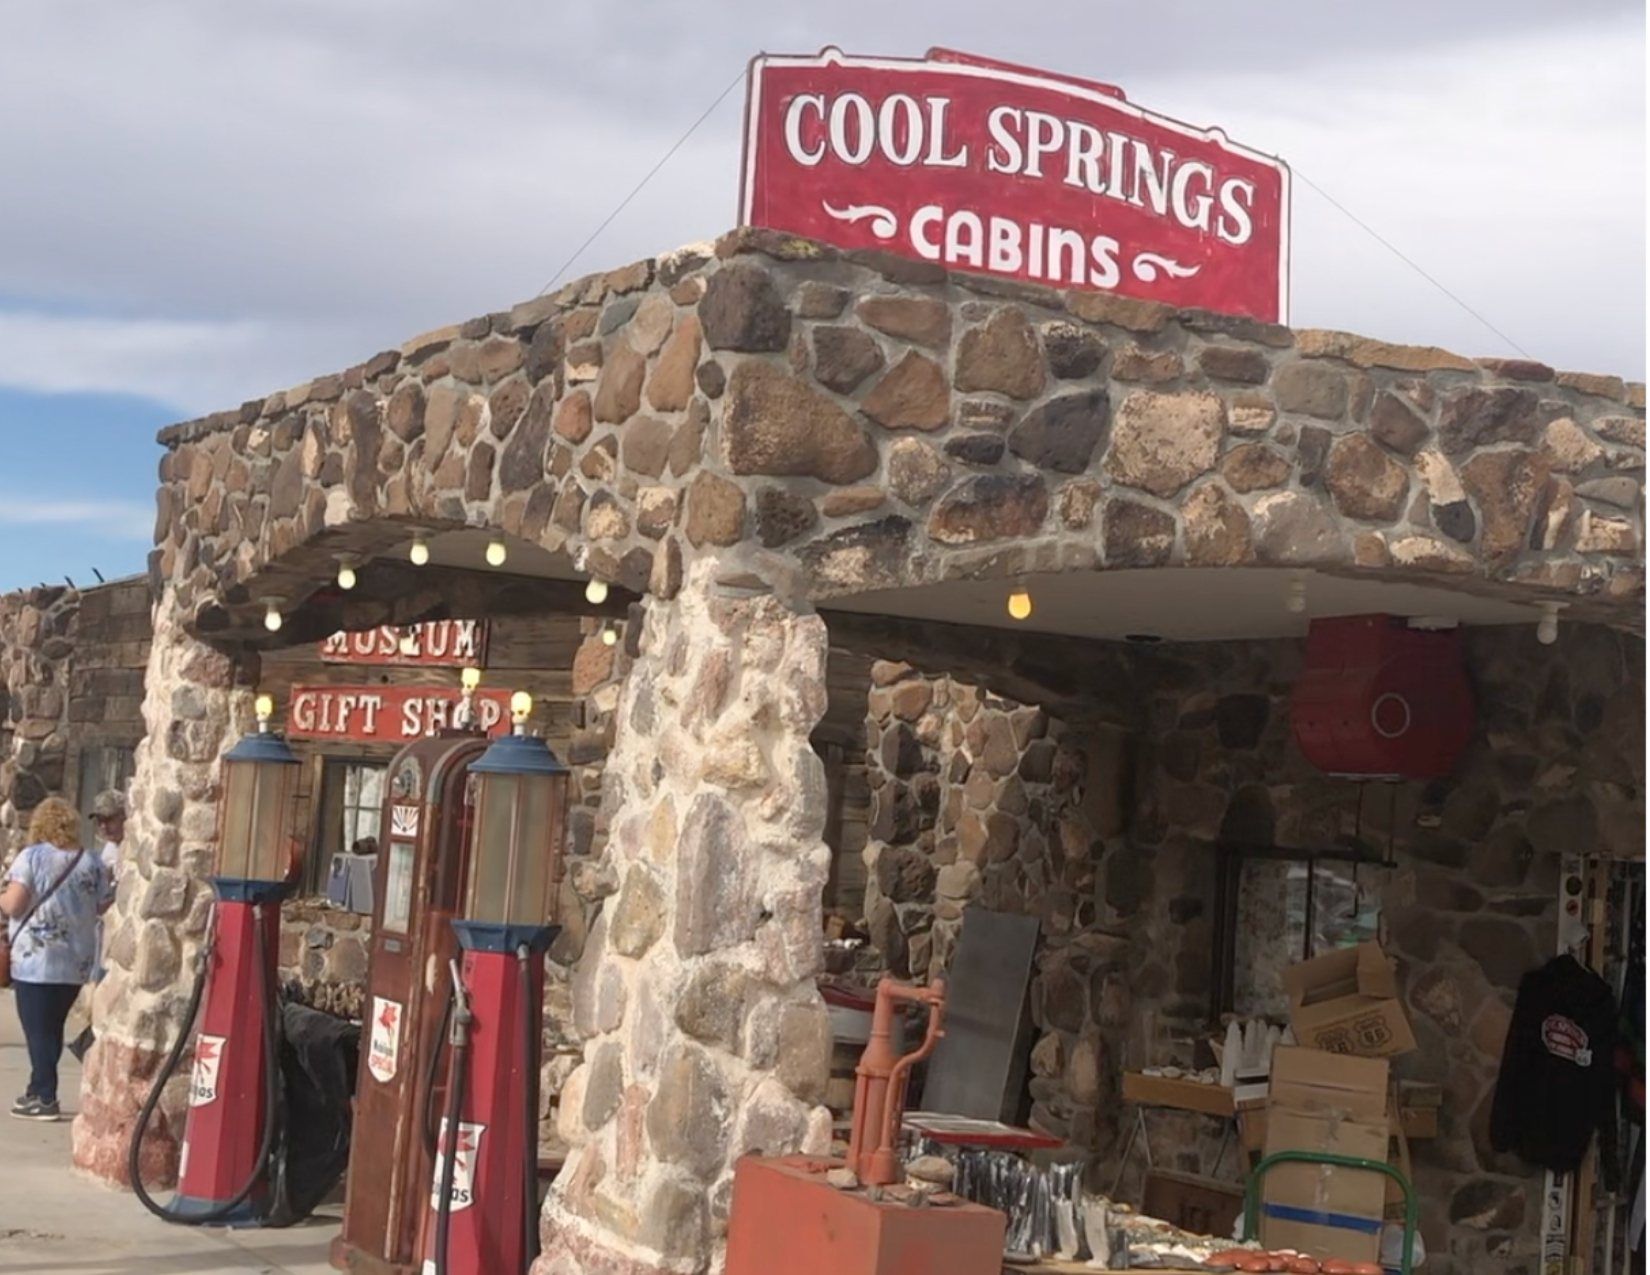 Stone Building with Red sign on top showing Cool Springs Cabins at the Cool Springs Station in Arizona